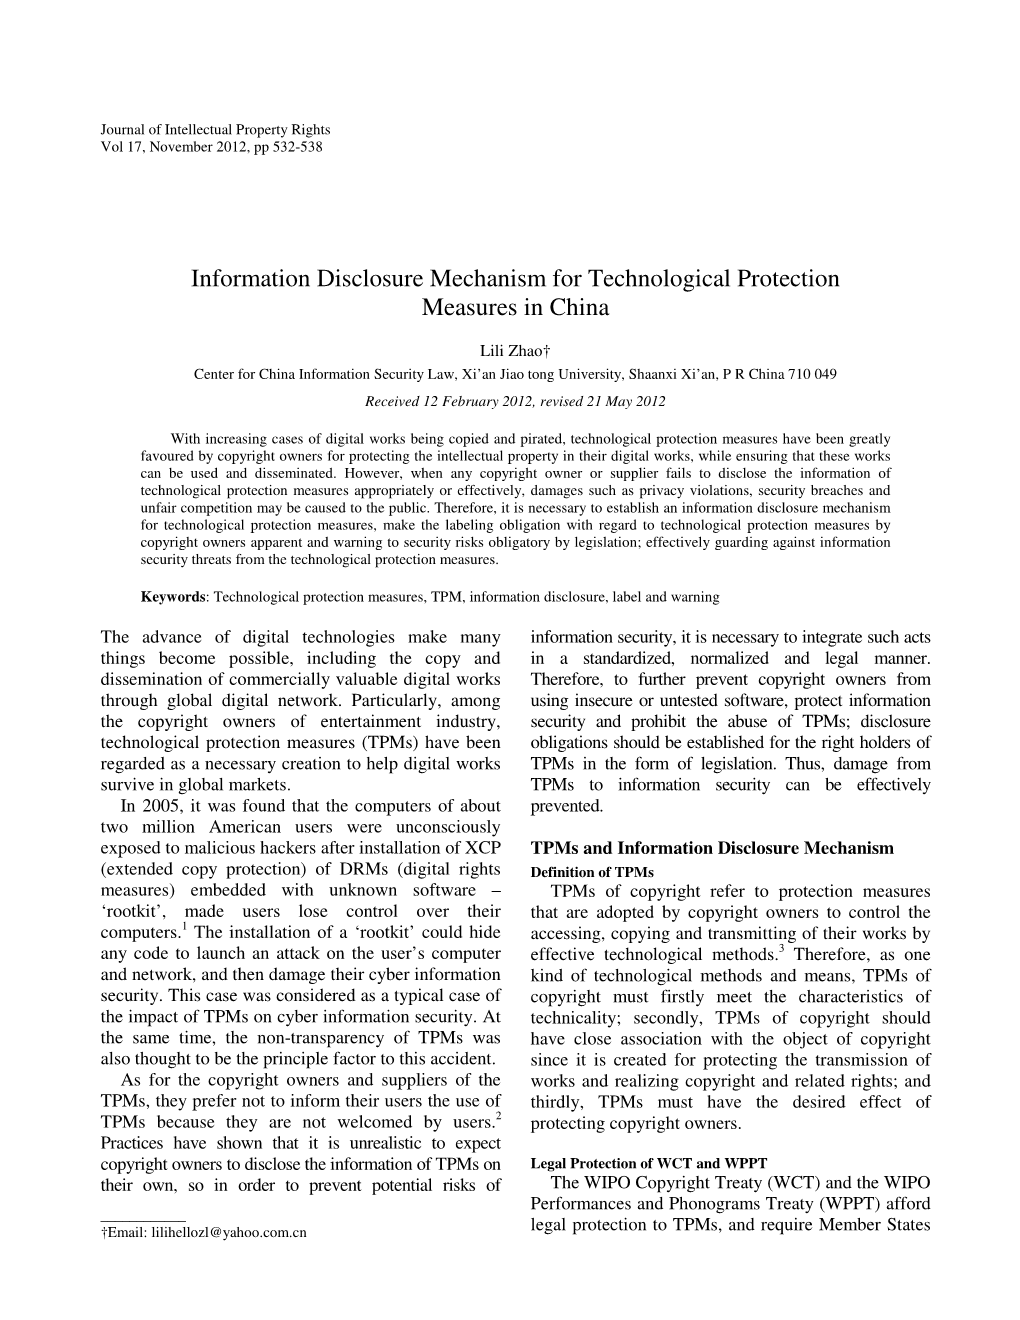 Information Disclosure Mechanism for Technological Protection Measures in China